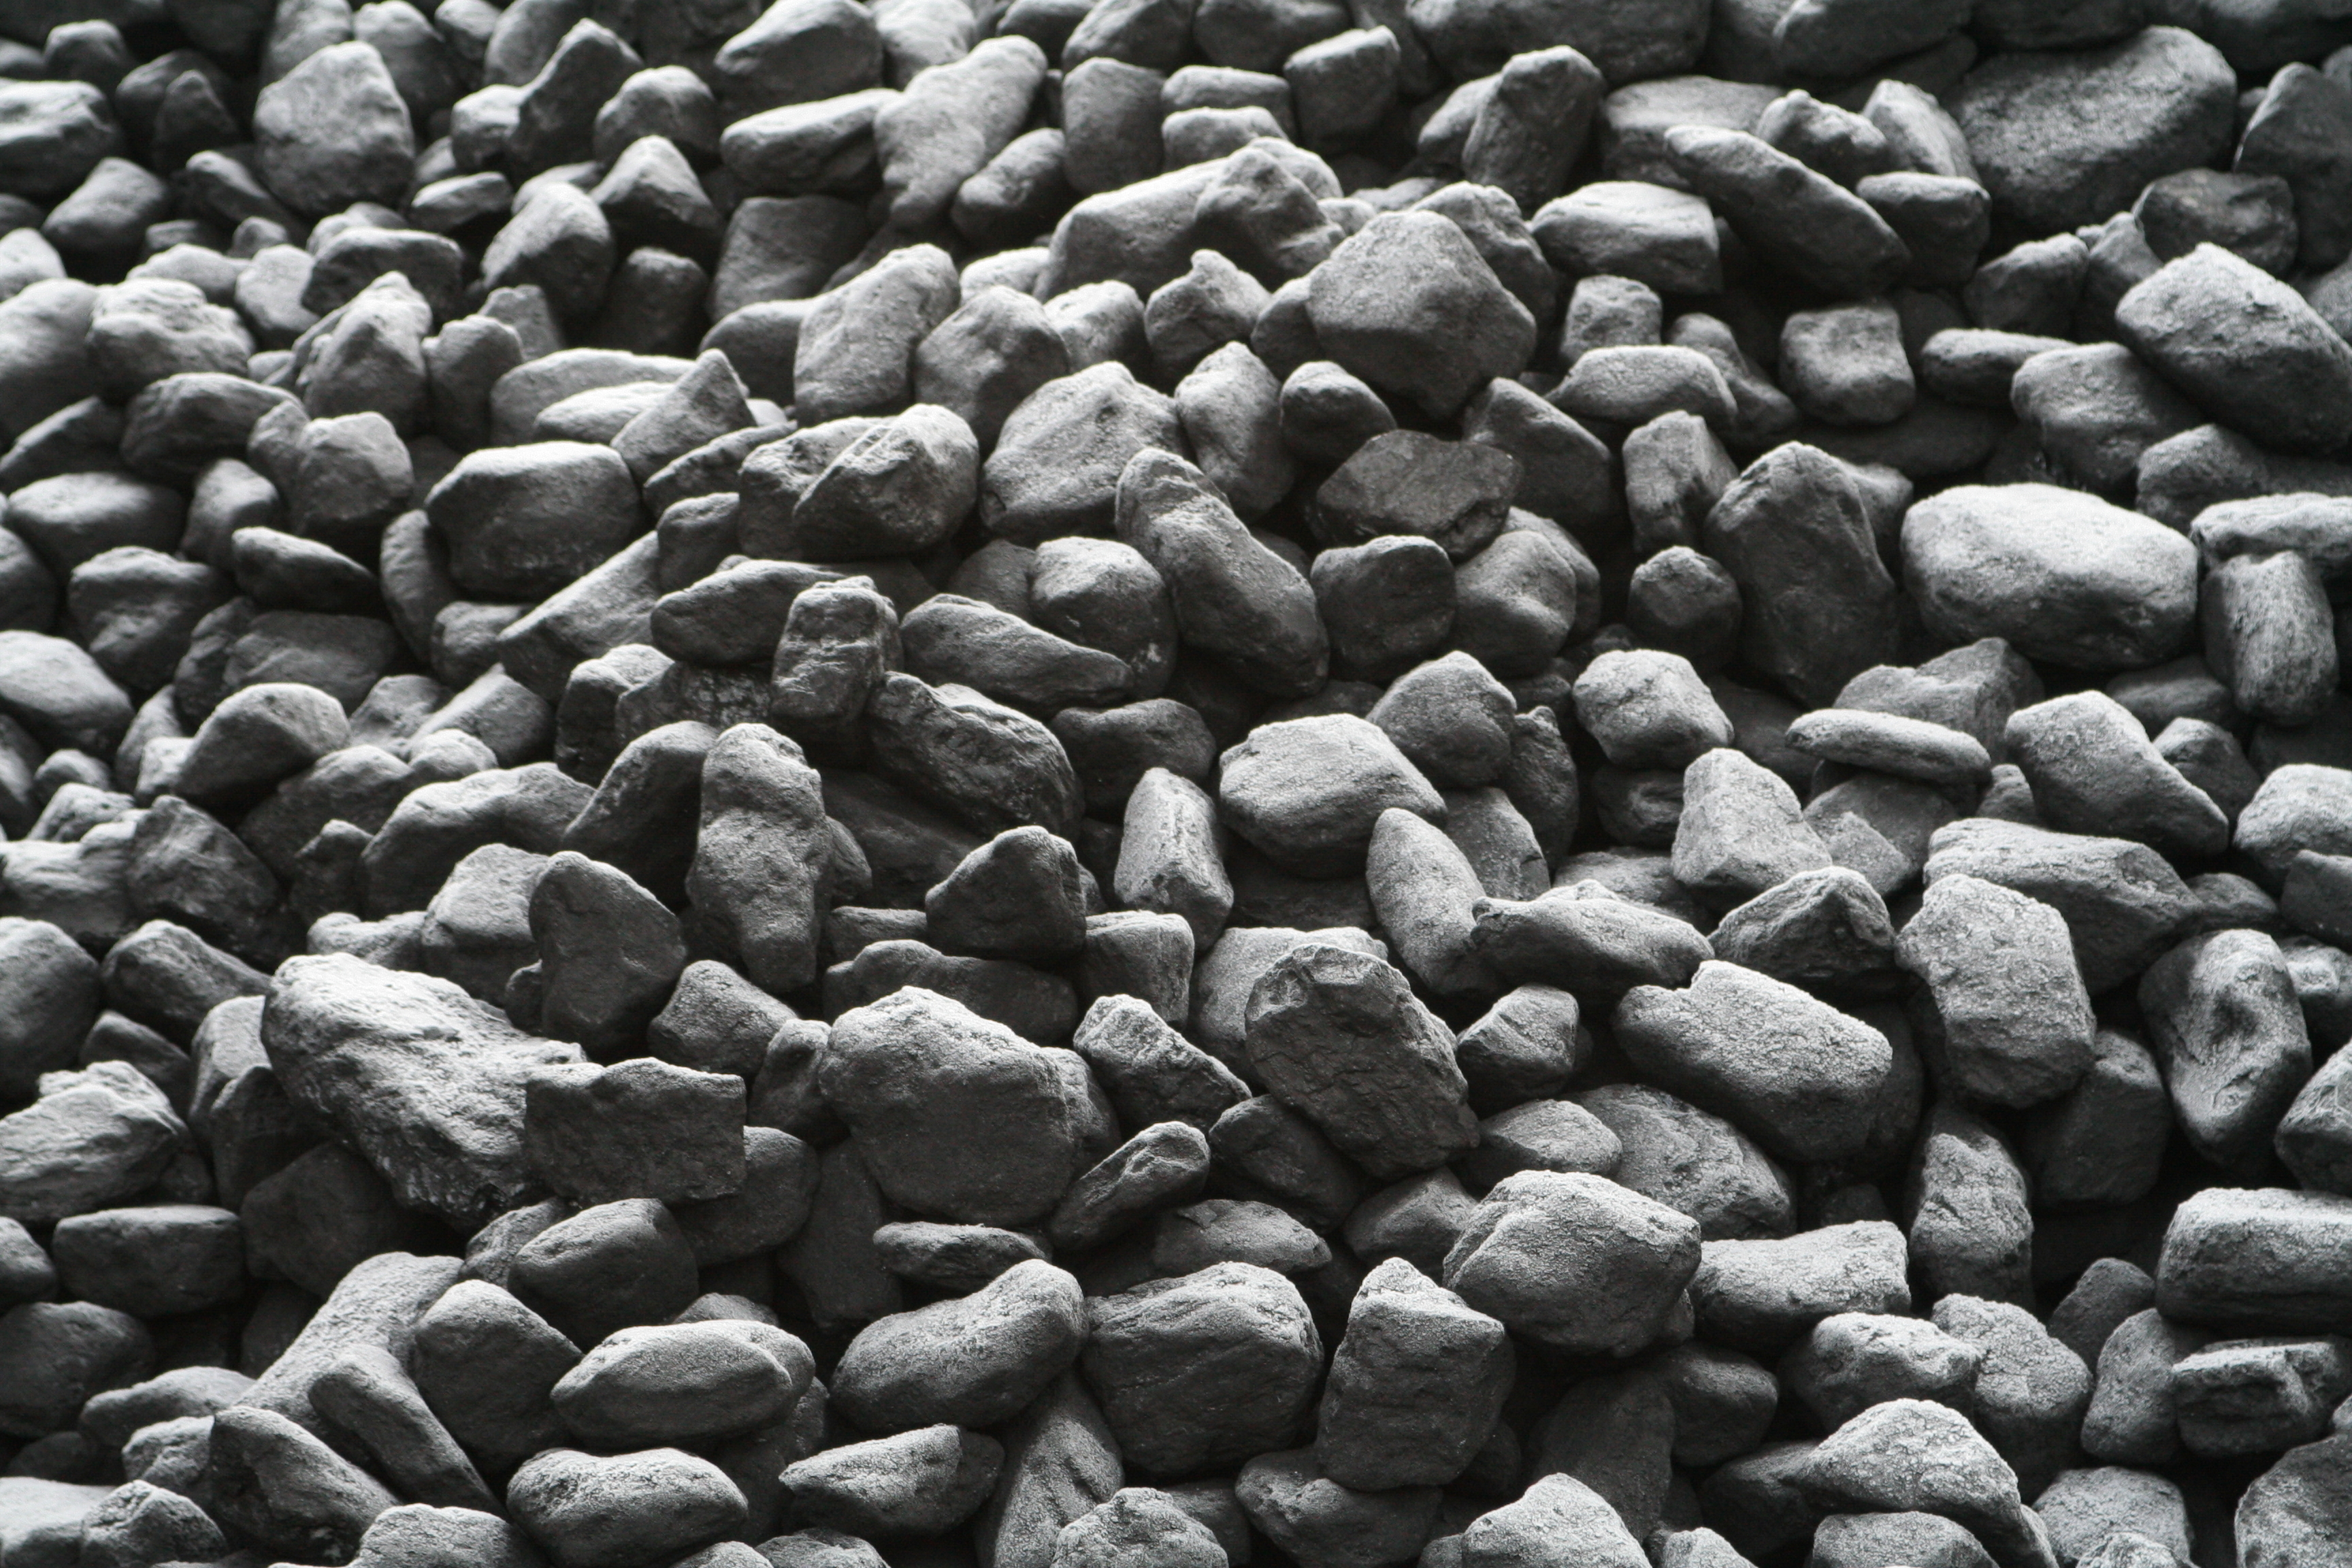 Coal Connoisseur: The Importer's Perspective